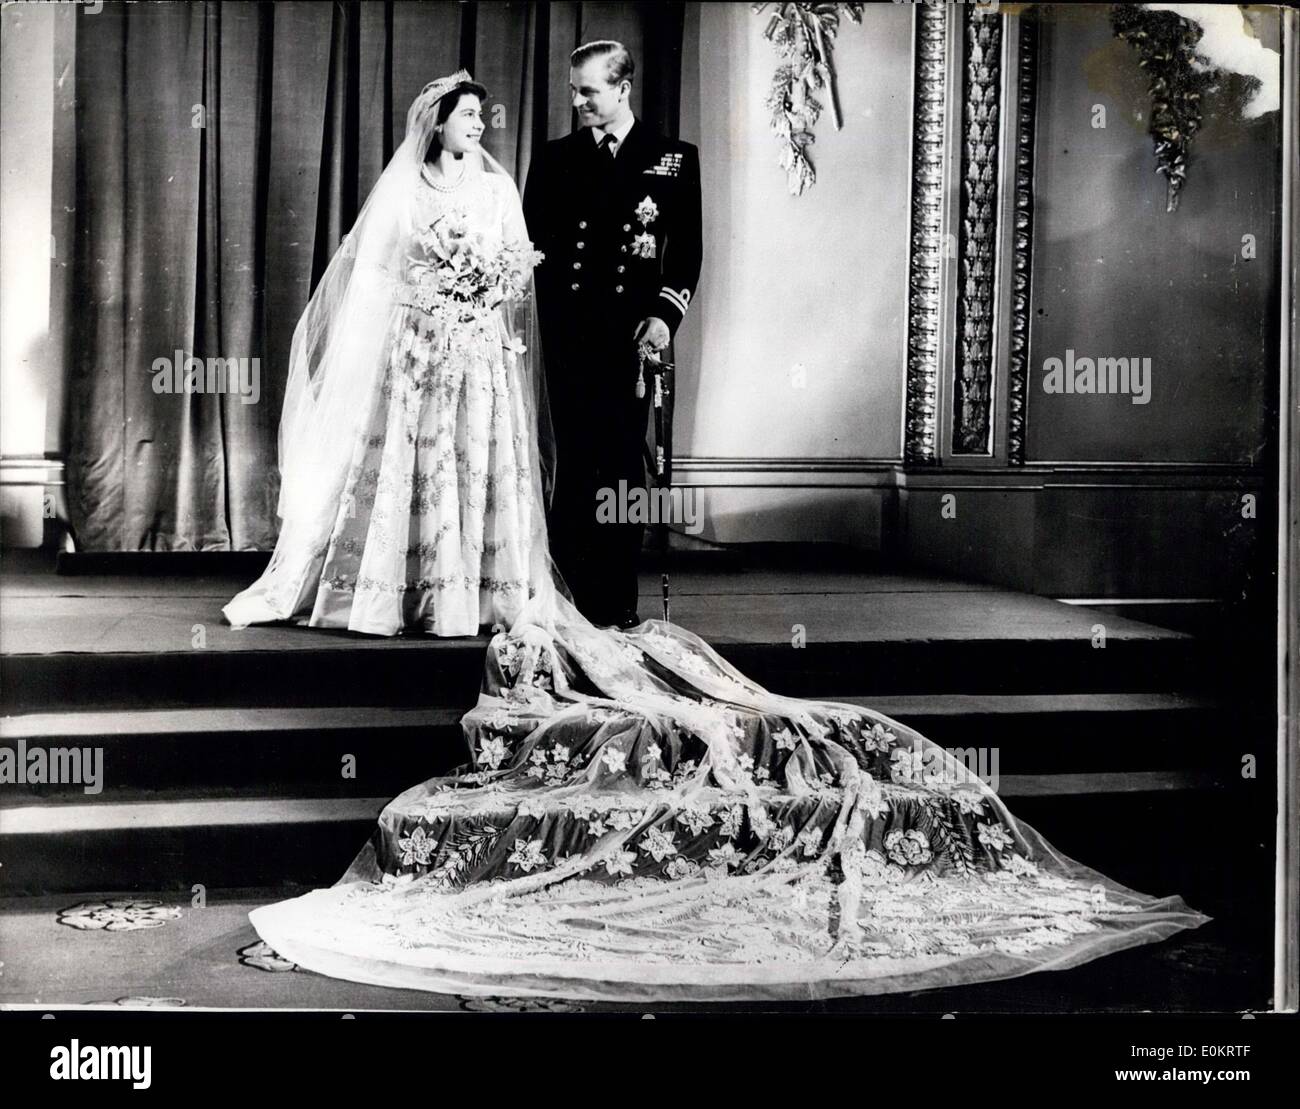 Nov. 20, 1947 - Twenty five years ago the Queen and Prince posed for their wedding photographs at Buckingham Palace. As Princess Elizabet, she was married at Westminster Abbey on the 20th November, 1947. Stock Photo